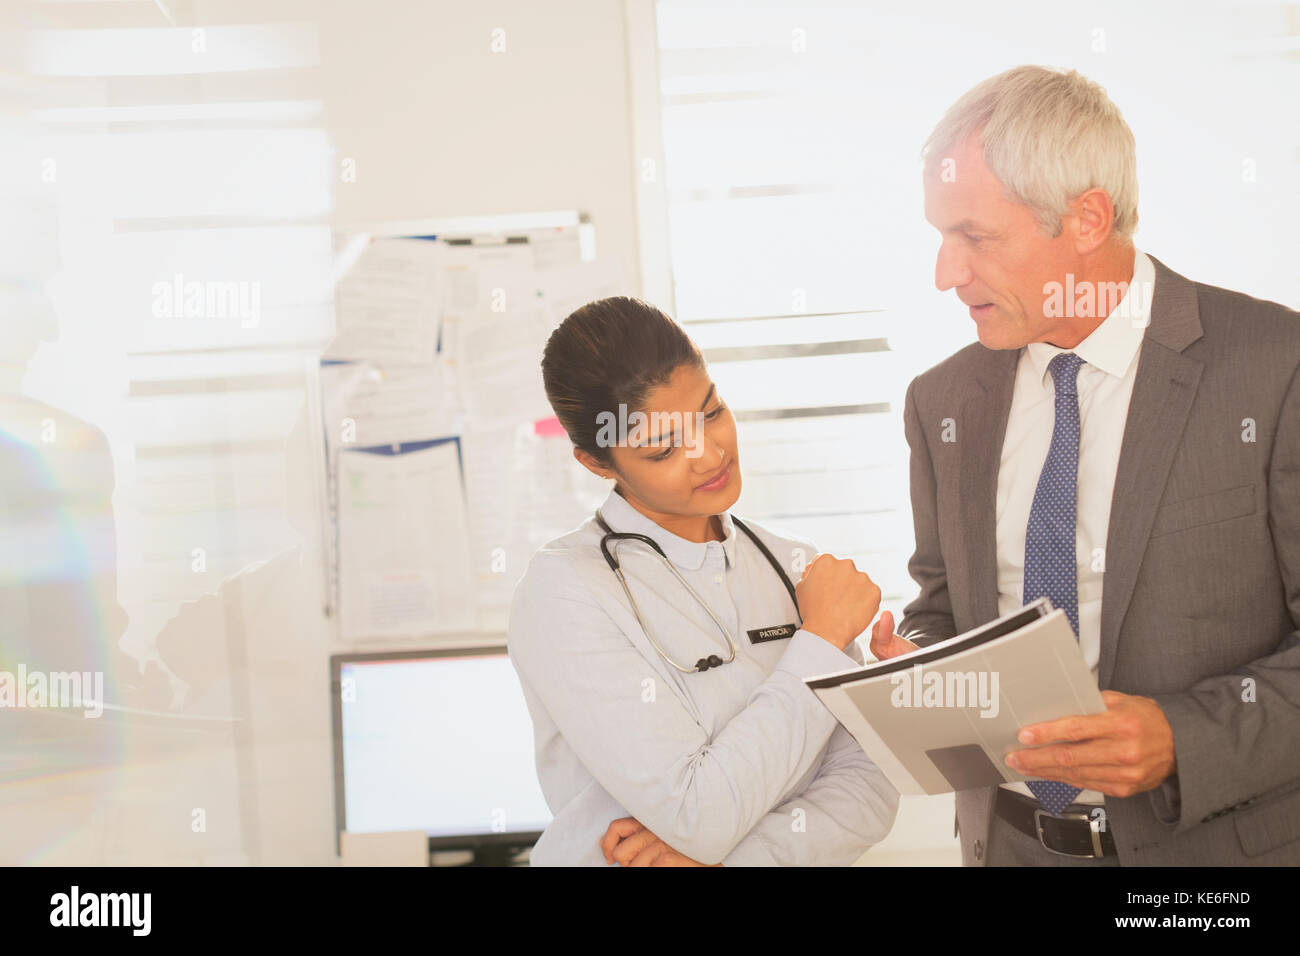 Female doctor and male hospital administrator reviewing paperwork Stock Photo